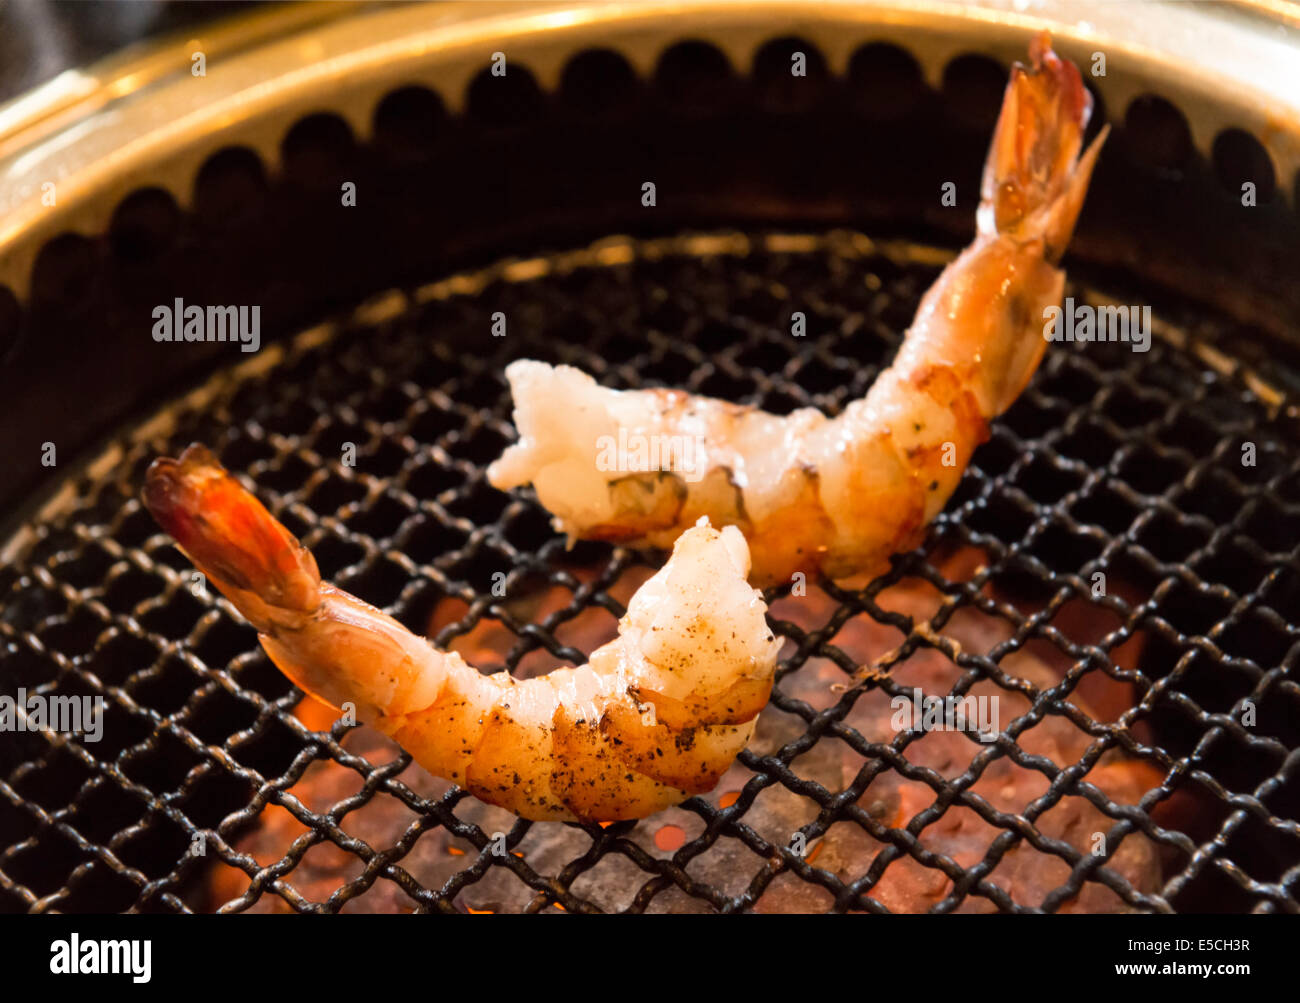 Closeup of shrimps being cooked on a Japanese grill stove at a restaurant Stock Photo